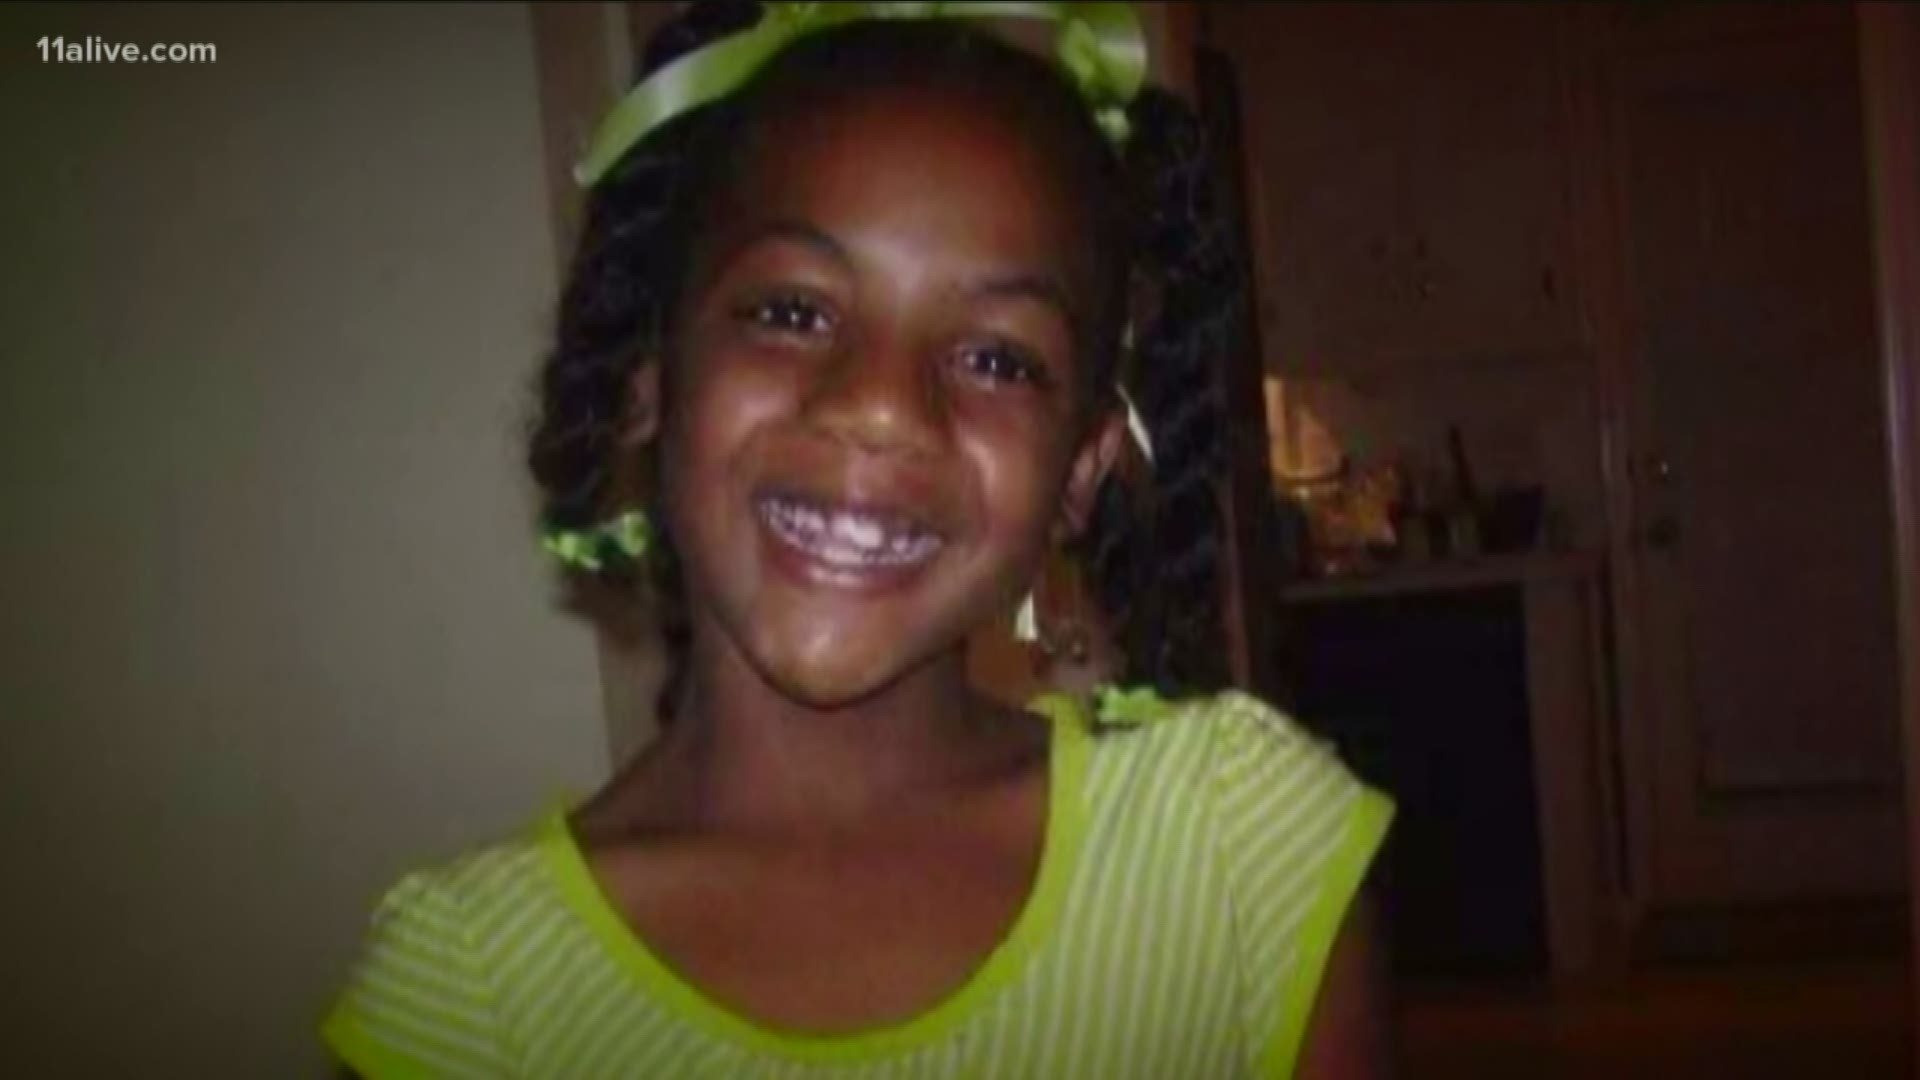 One group filed a new motion saying that Tiffany Moss needs a new trial for multiple reasons.